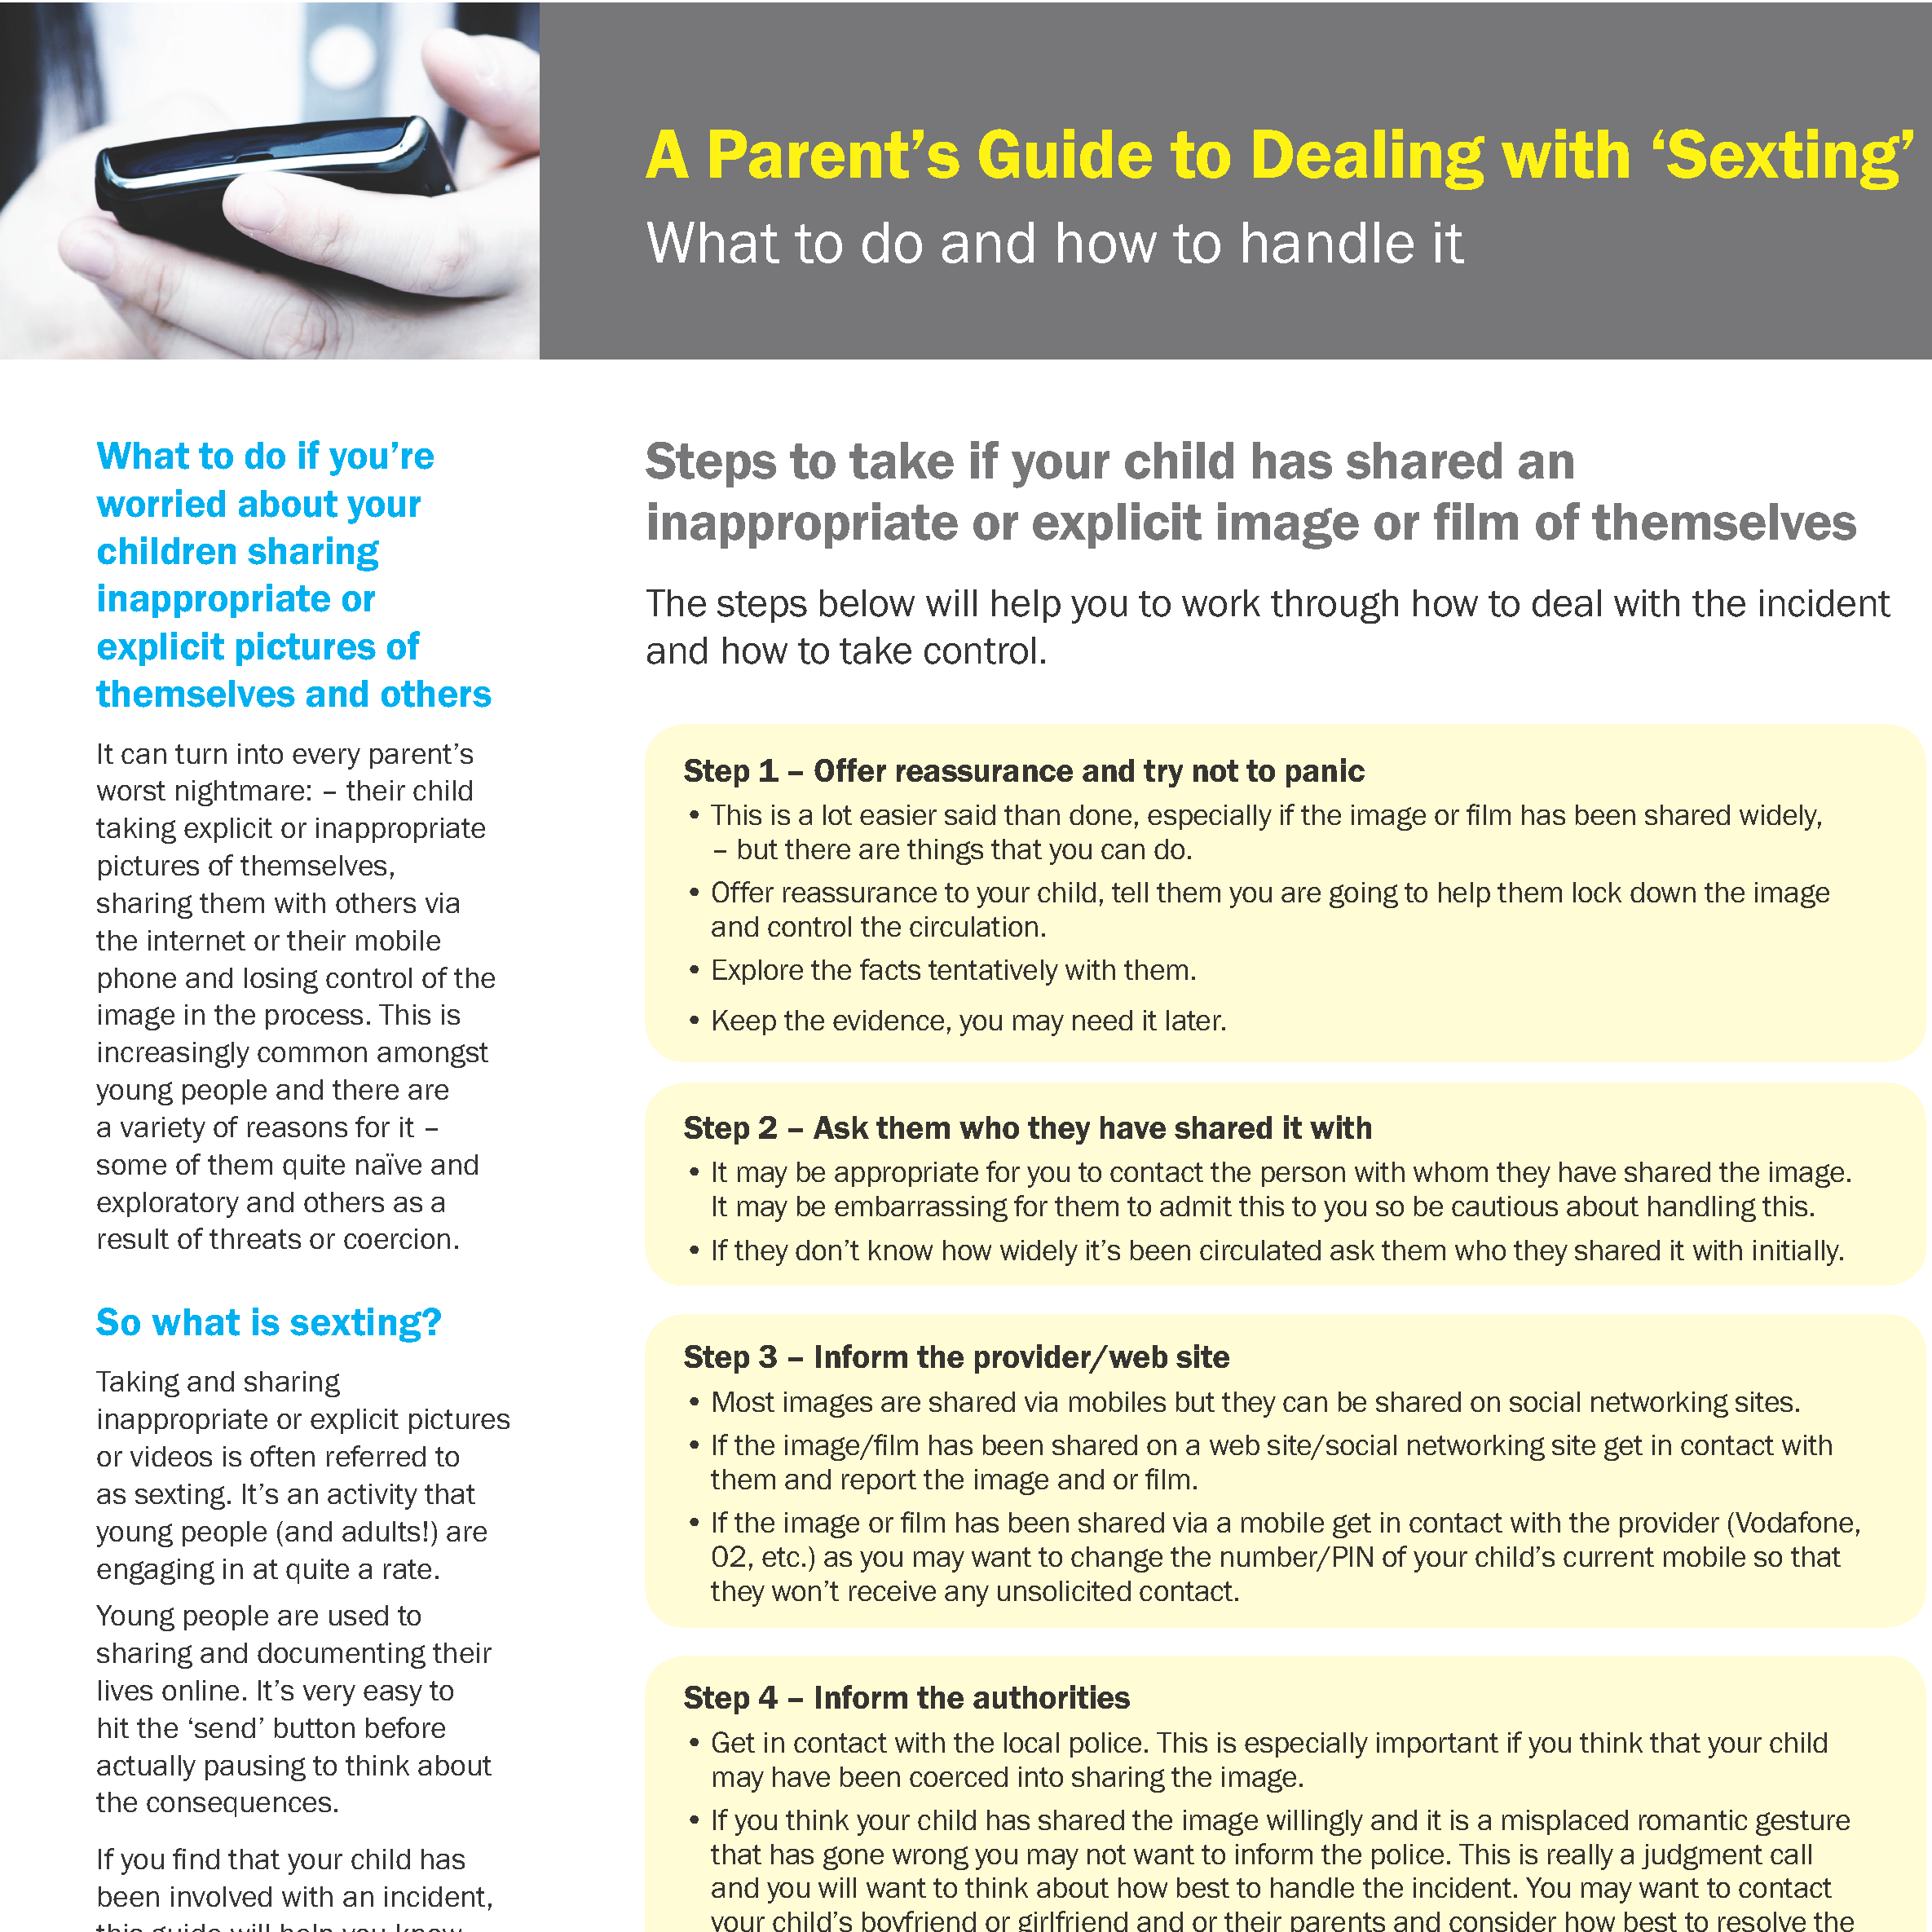 A Parents Guide to Dealing with Sexting 26SEP13 Page 1